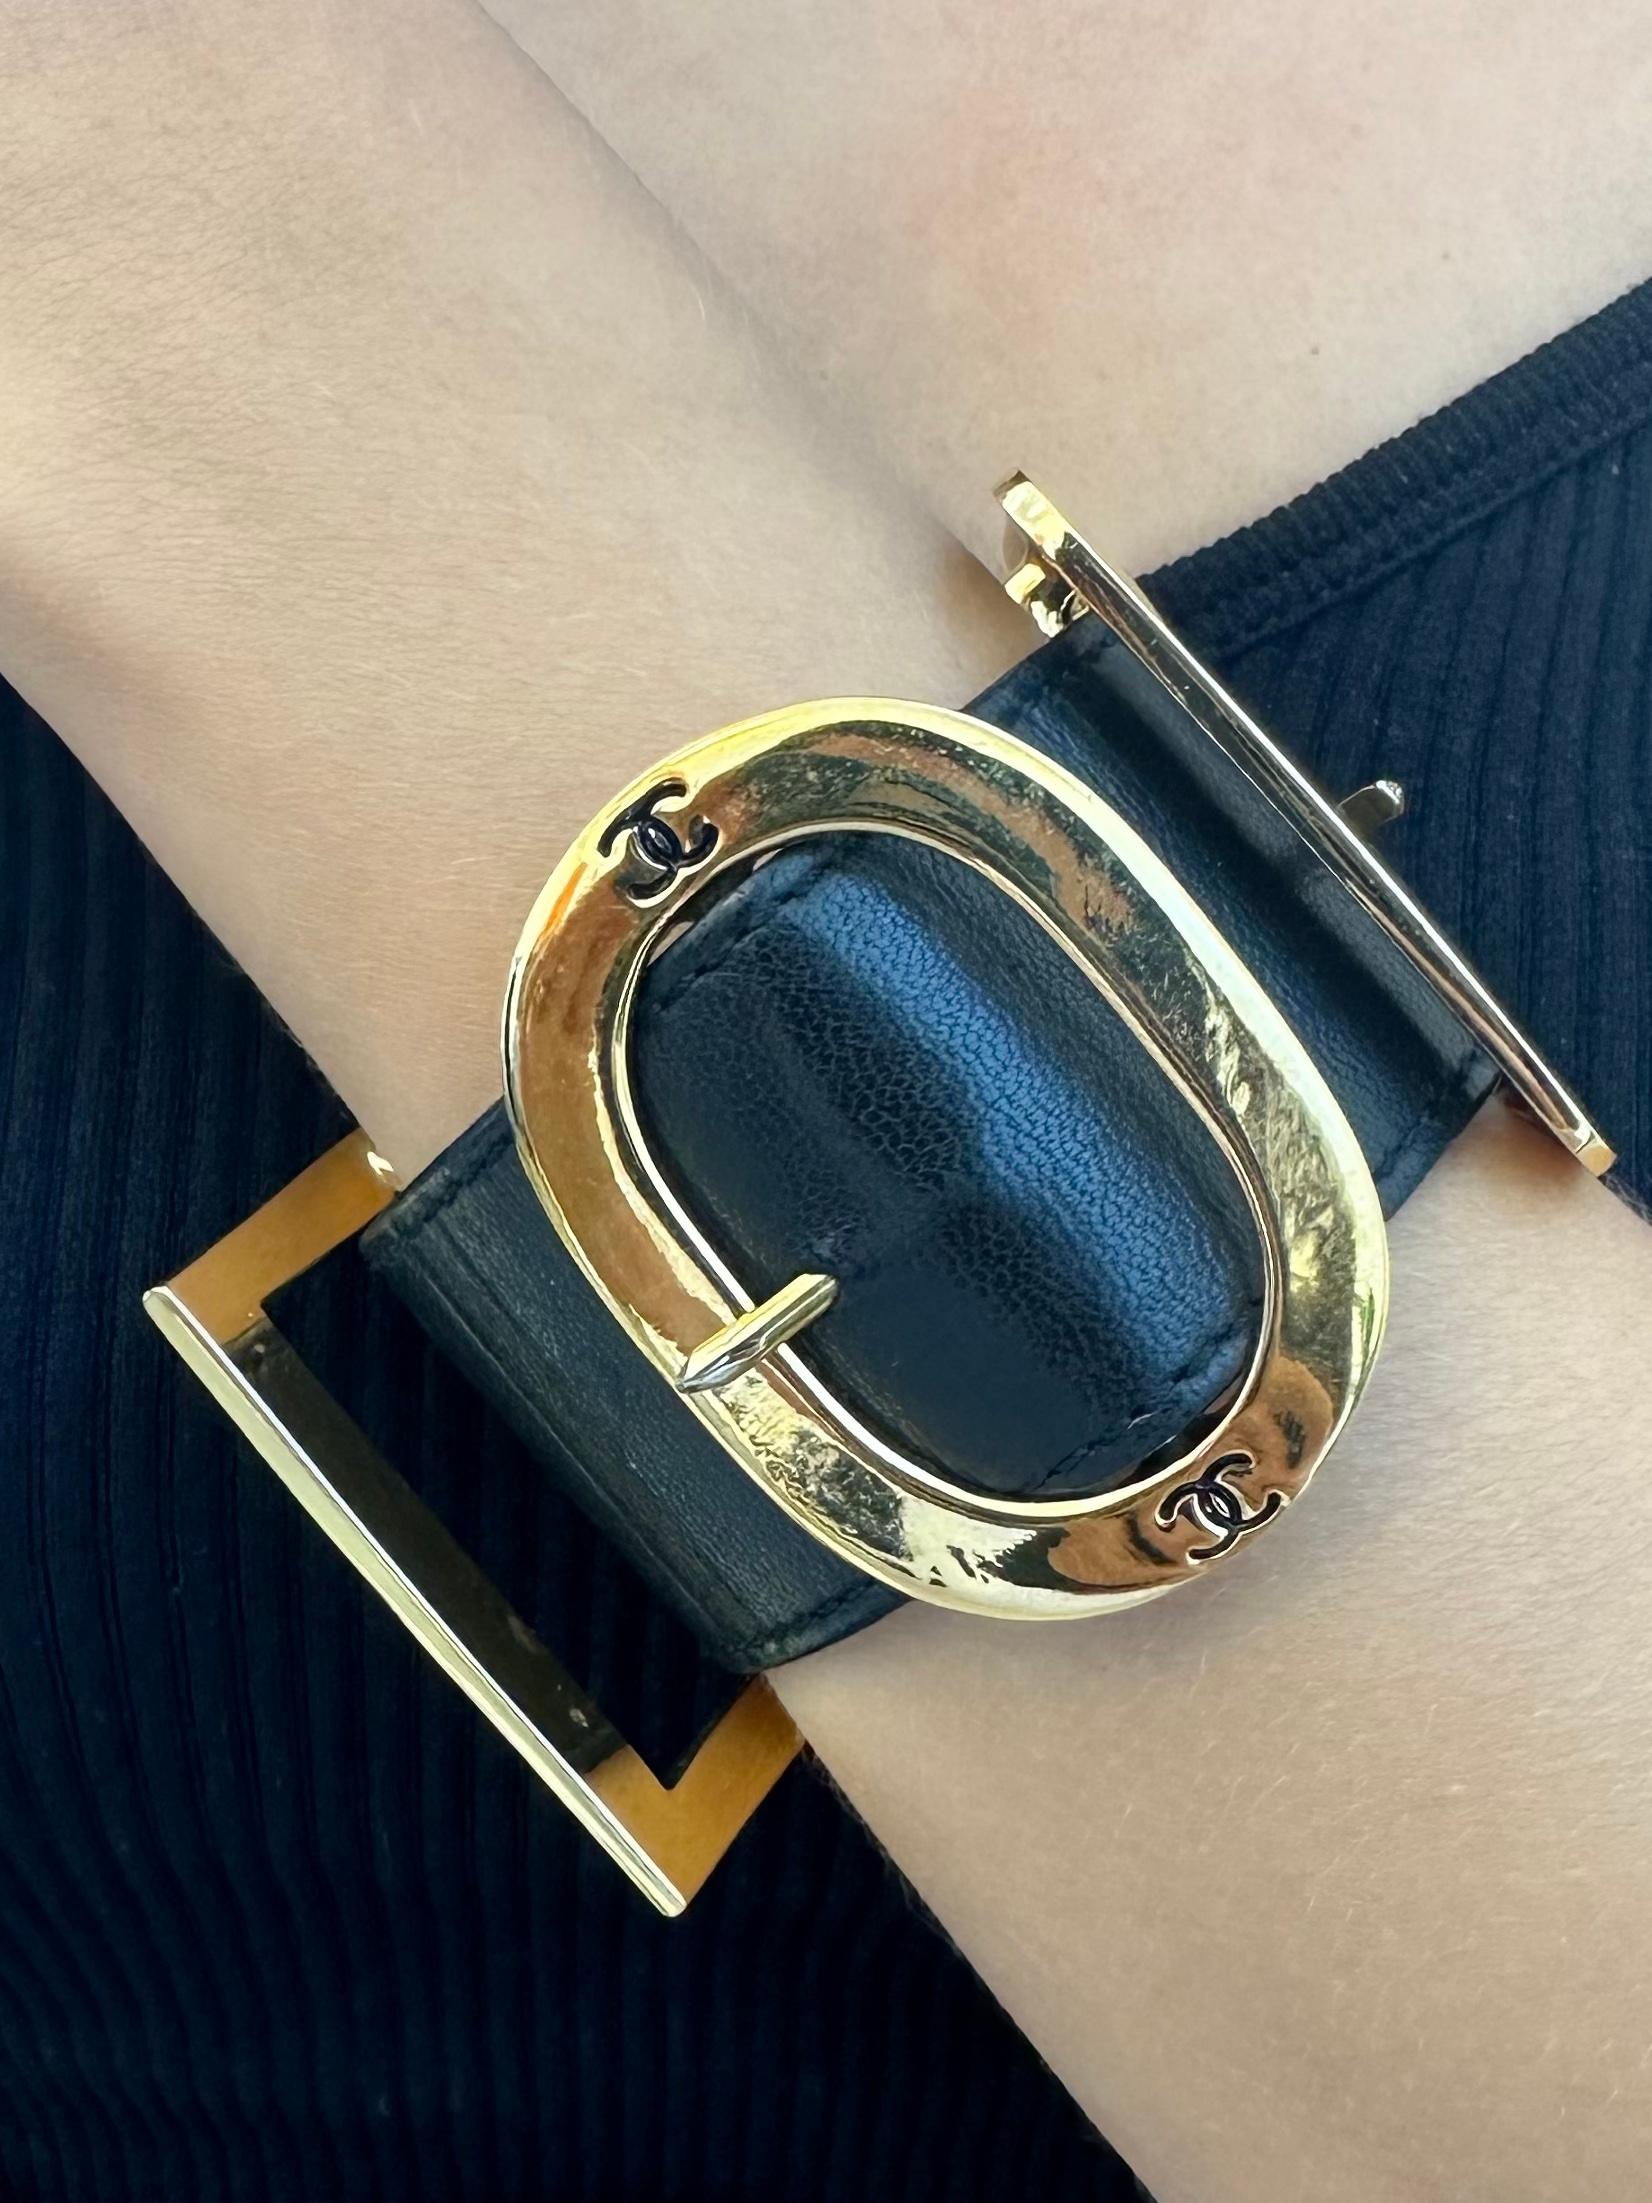 In CHANEL's iconic black leather and gold-tone hardware composition, this buttery bracelet is adorned with oversized, squared buckle decorations and fastening.

* Black
* Leather
* Engraved logos
* Decorative buckle details
* Gold-tone hardware
*